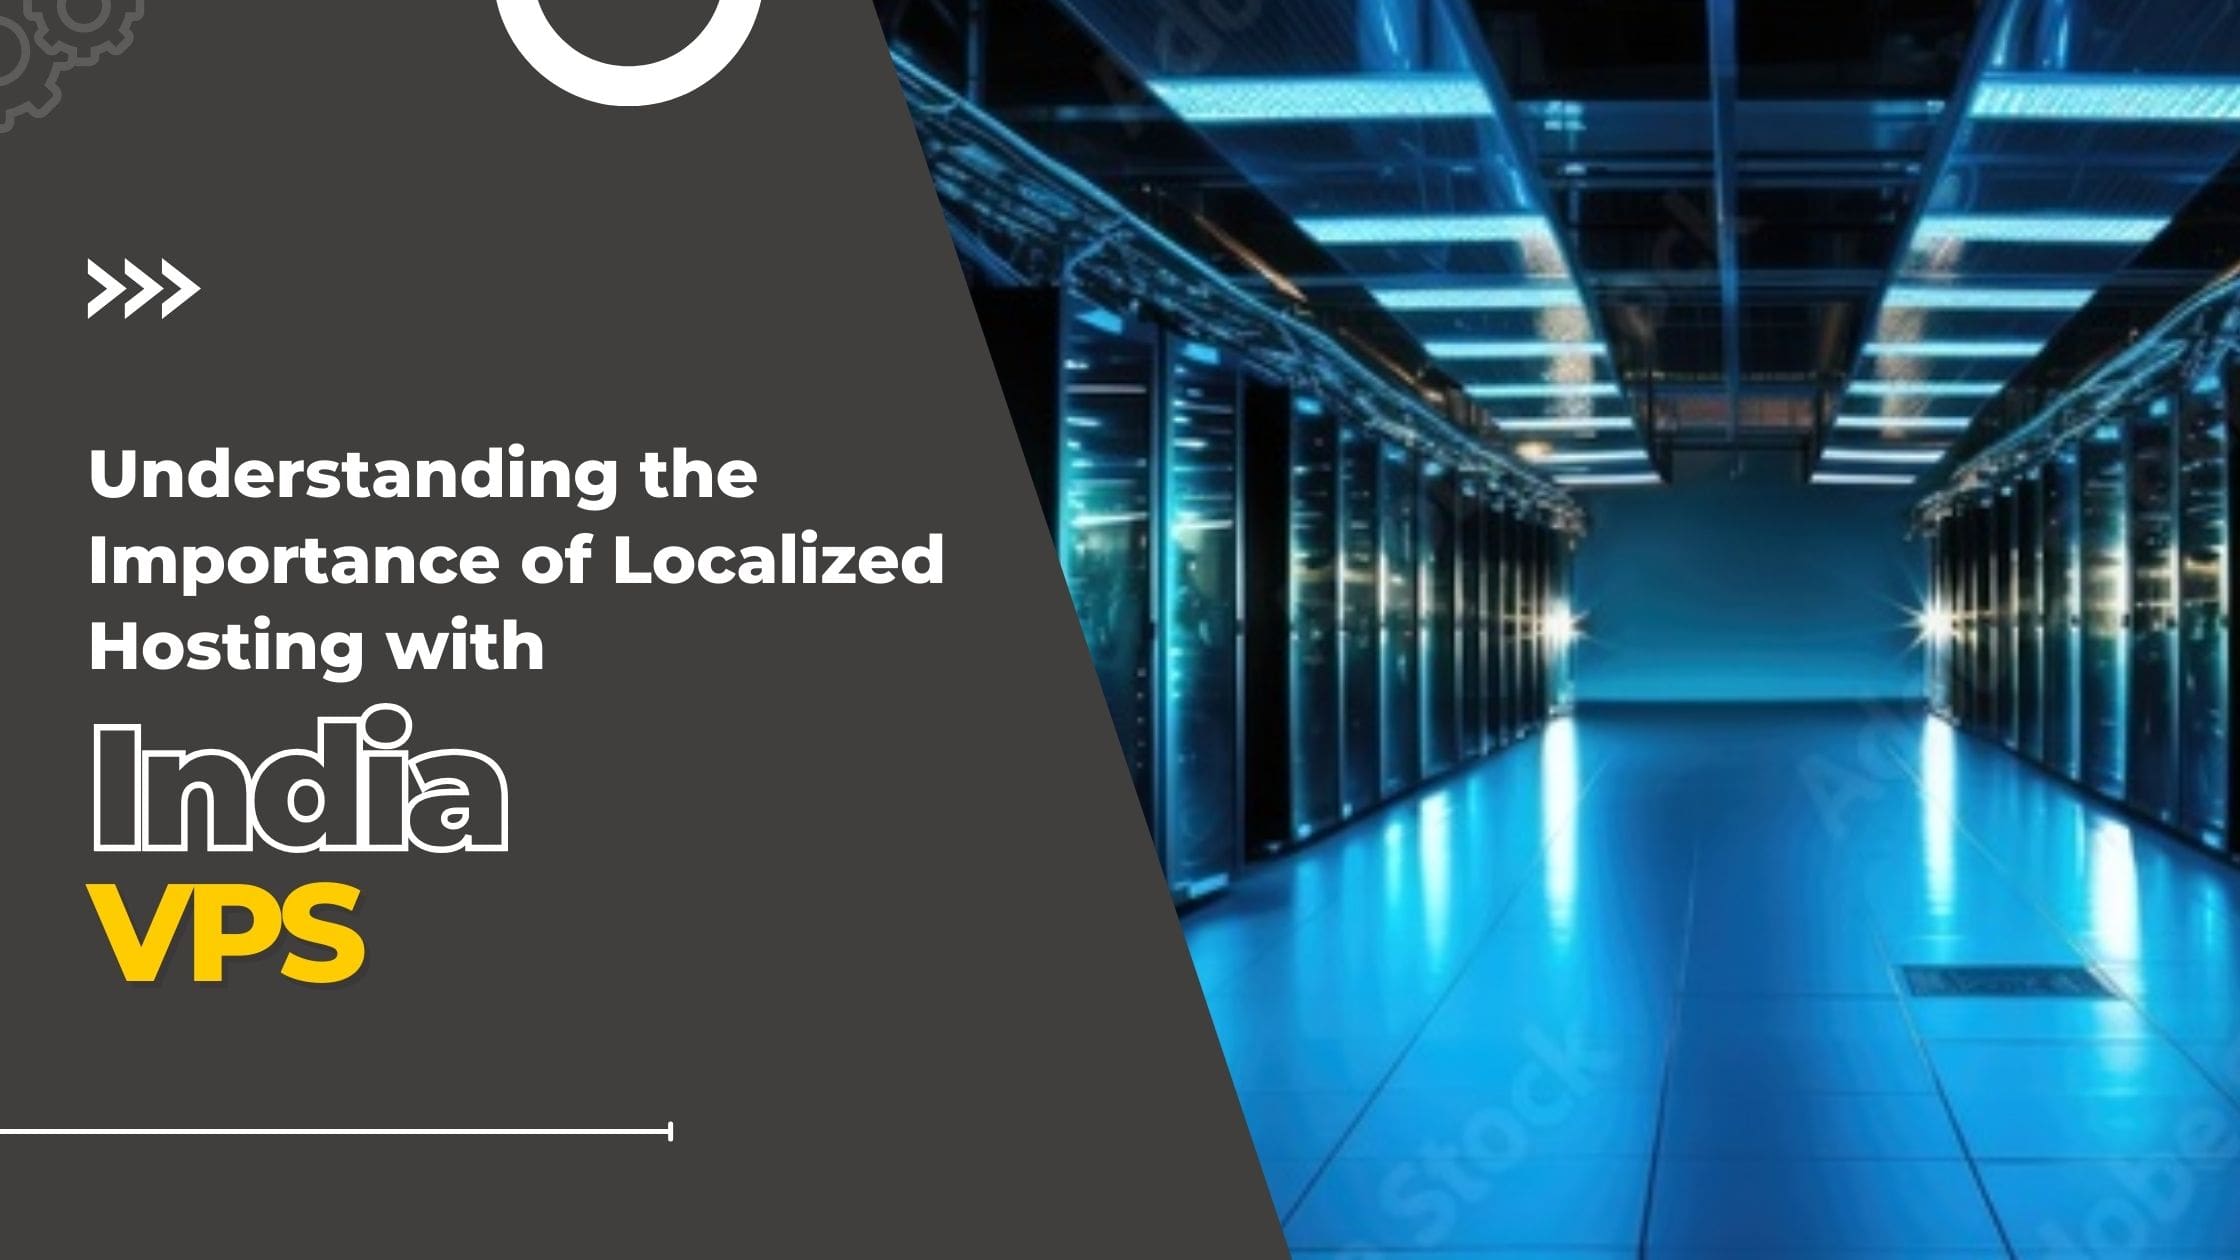 Understanding the Importance of Localized Hosting with India VPS